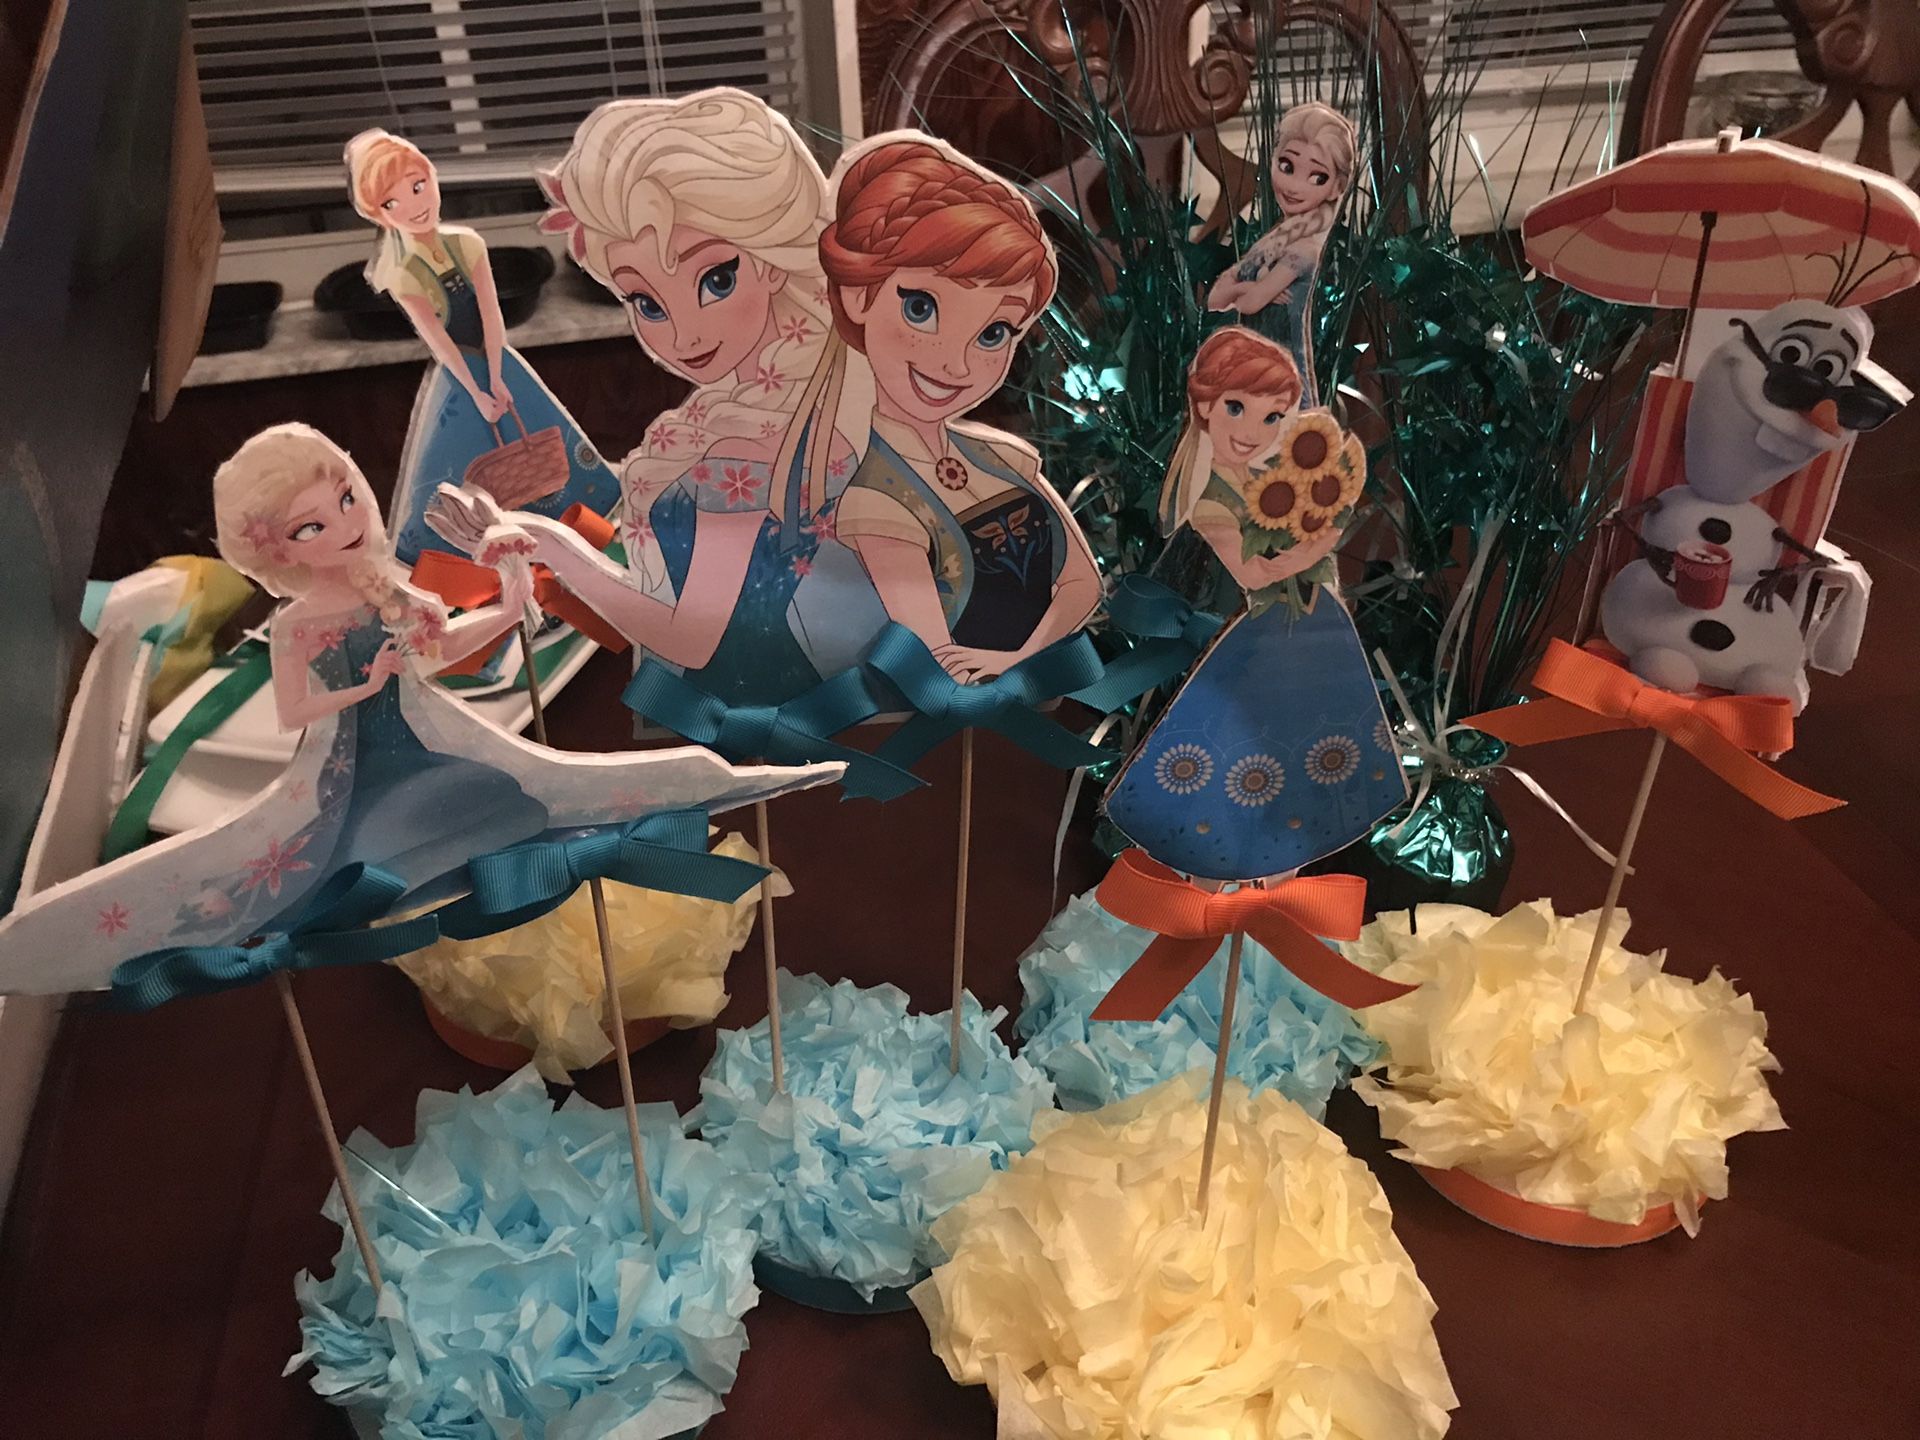 Decorations for Frozen birthday